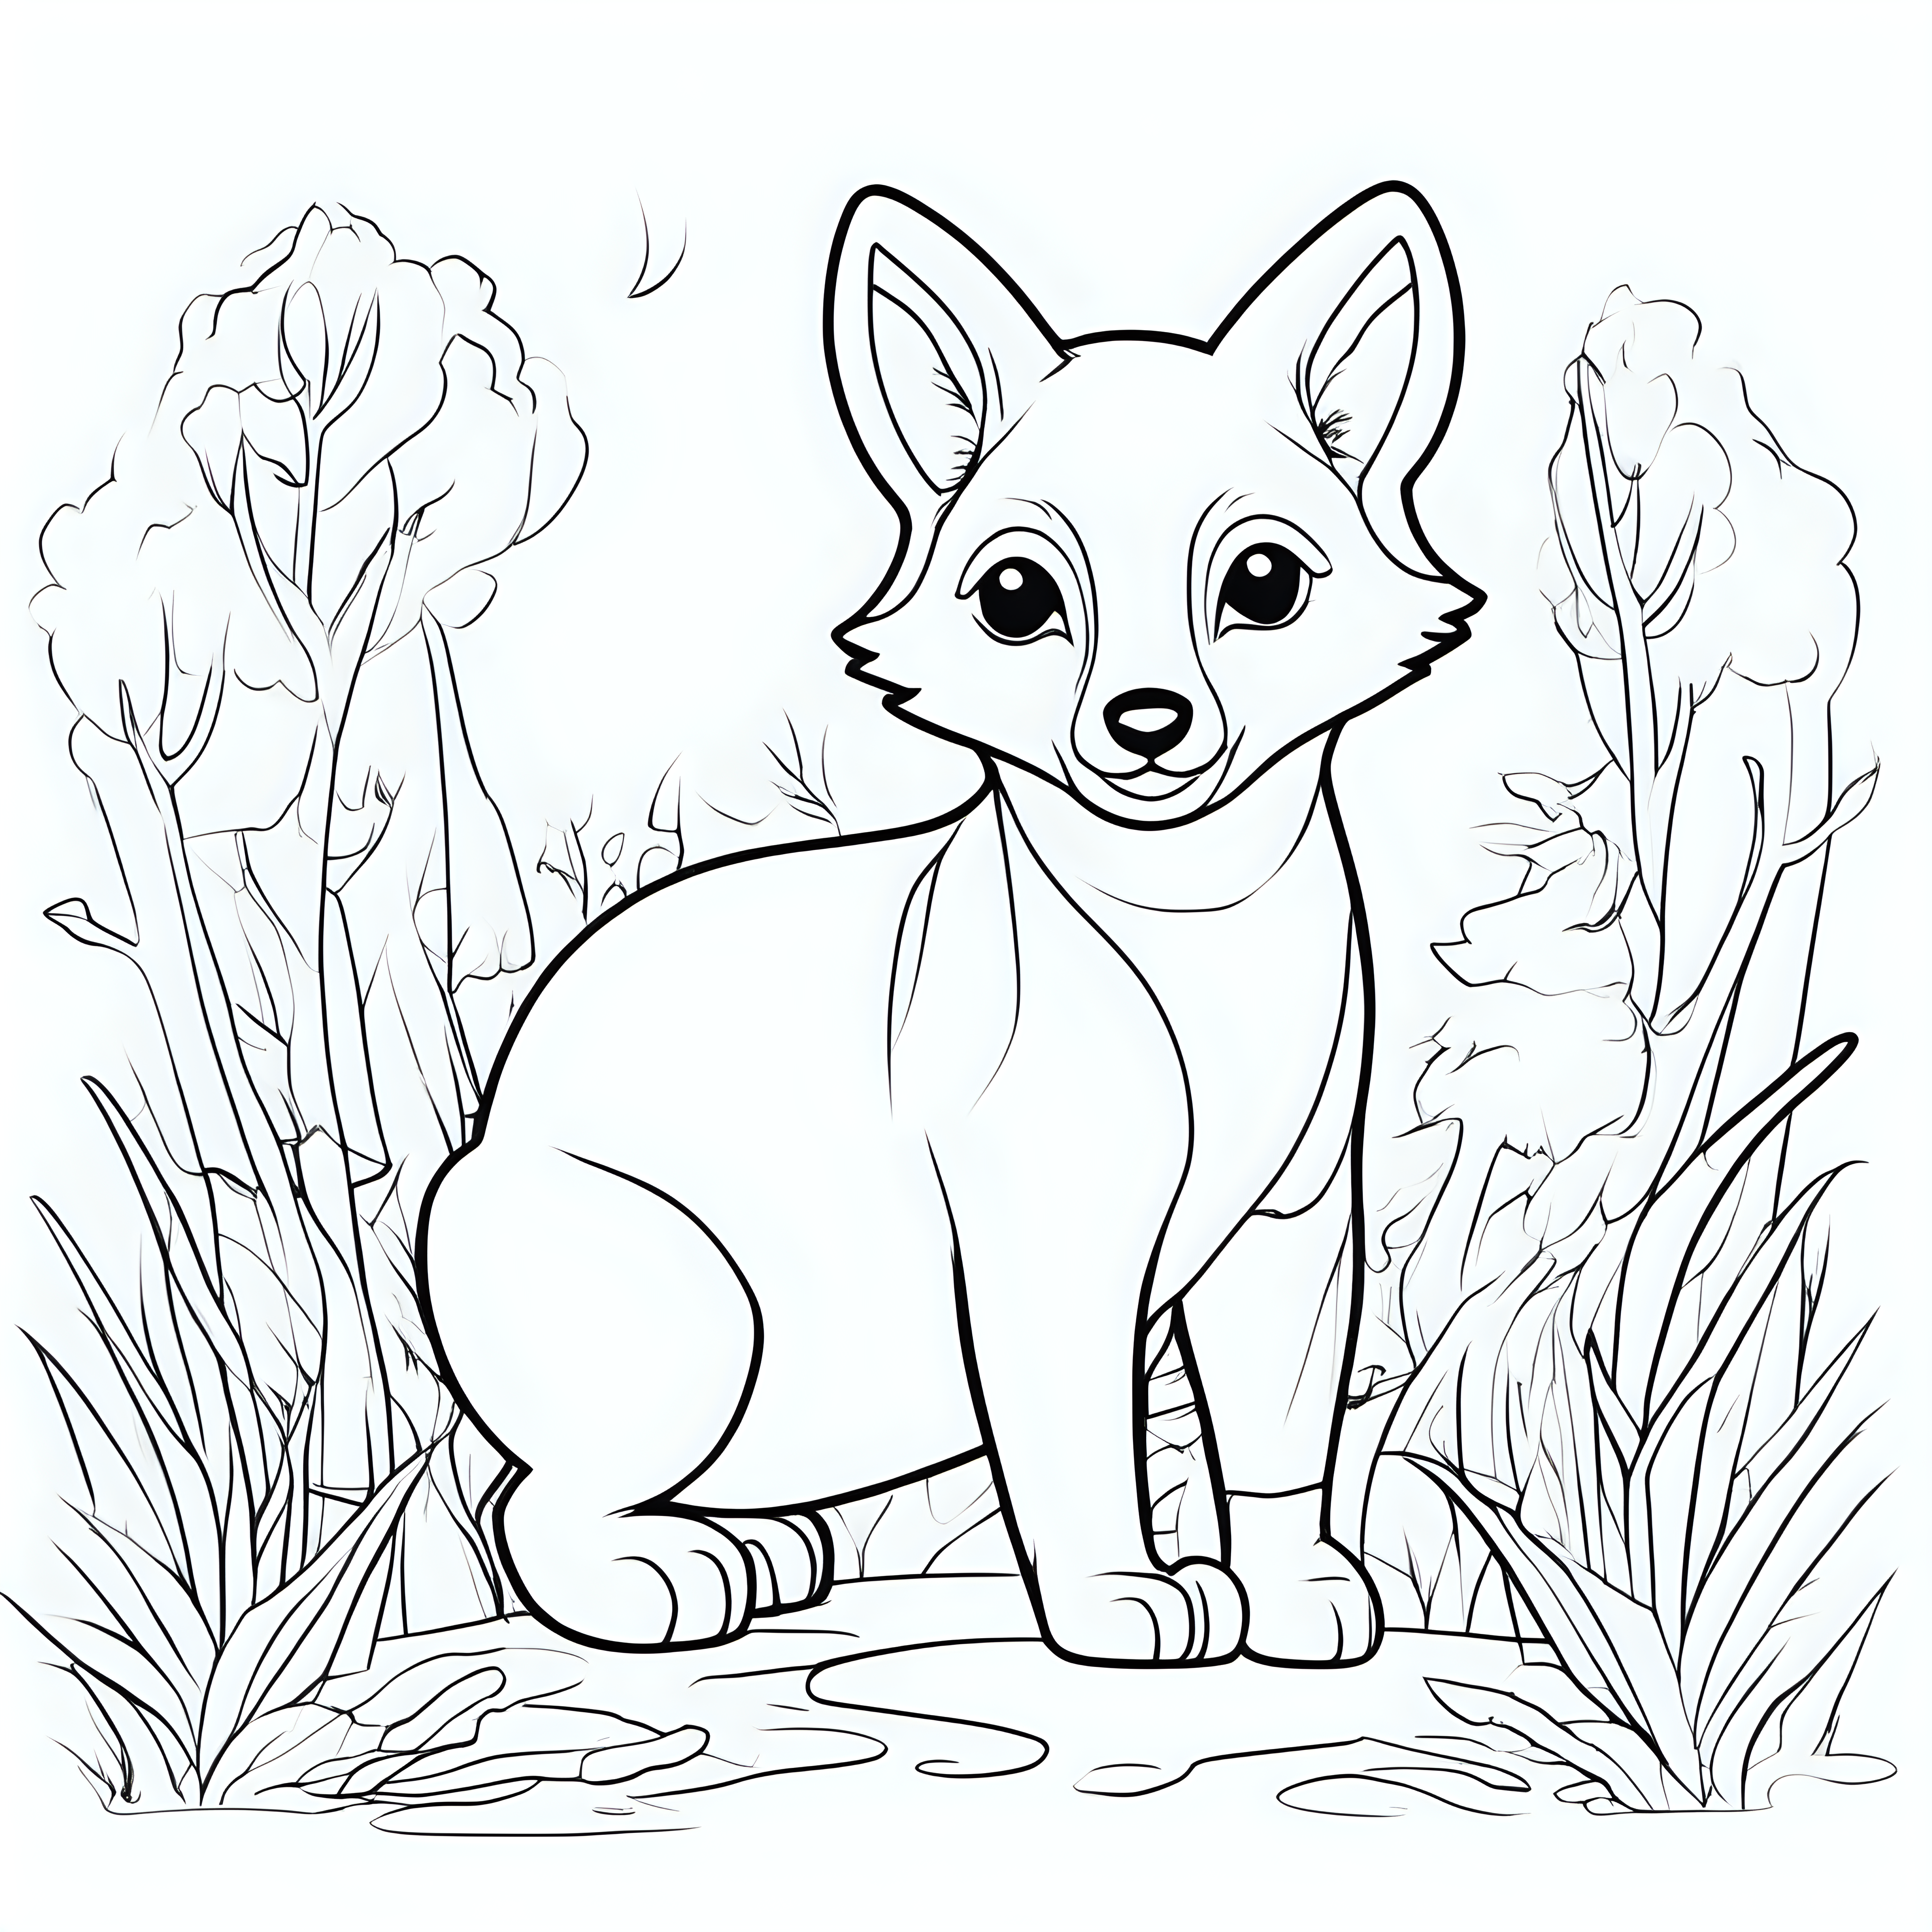 draw cute animals with only the outline in